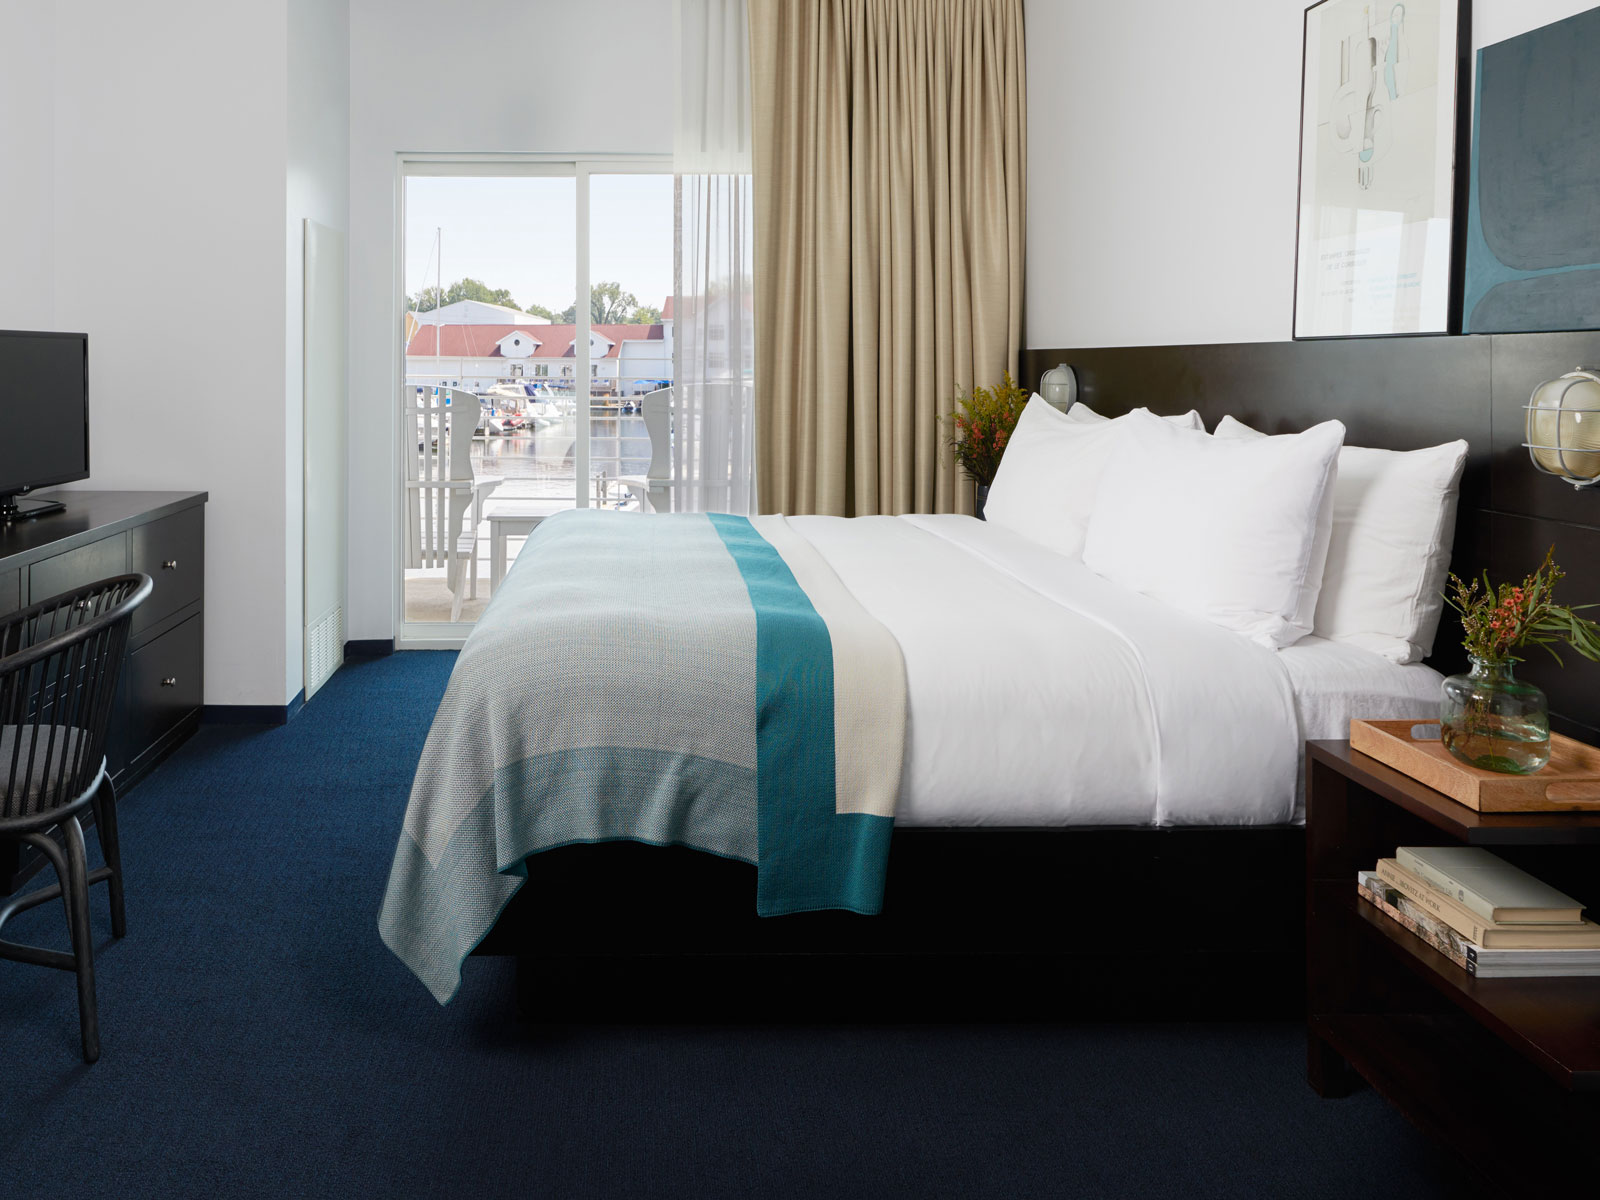 Bedroom with King Size bed, white linens, blue throw blanket and a view of the New Buffalo Marina through the window